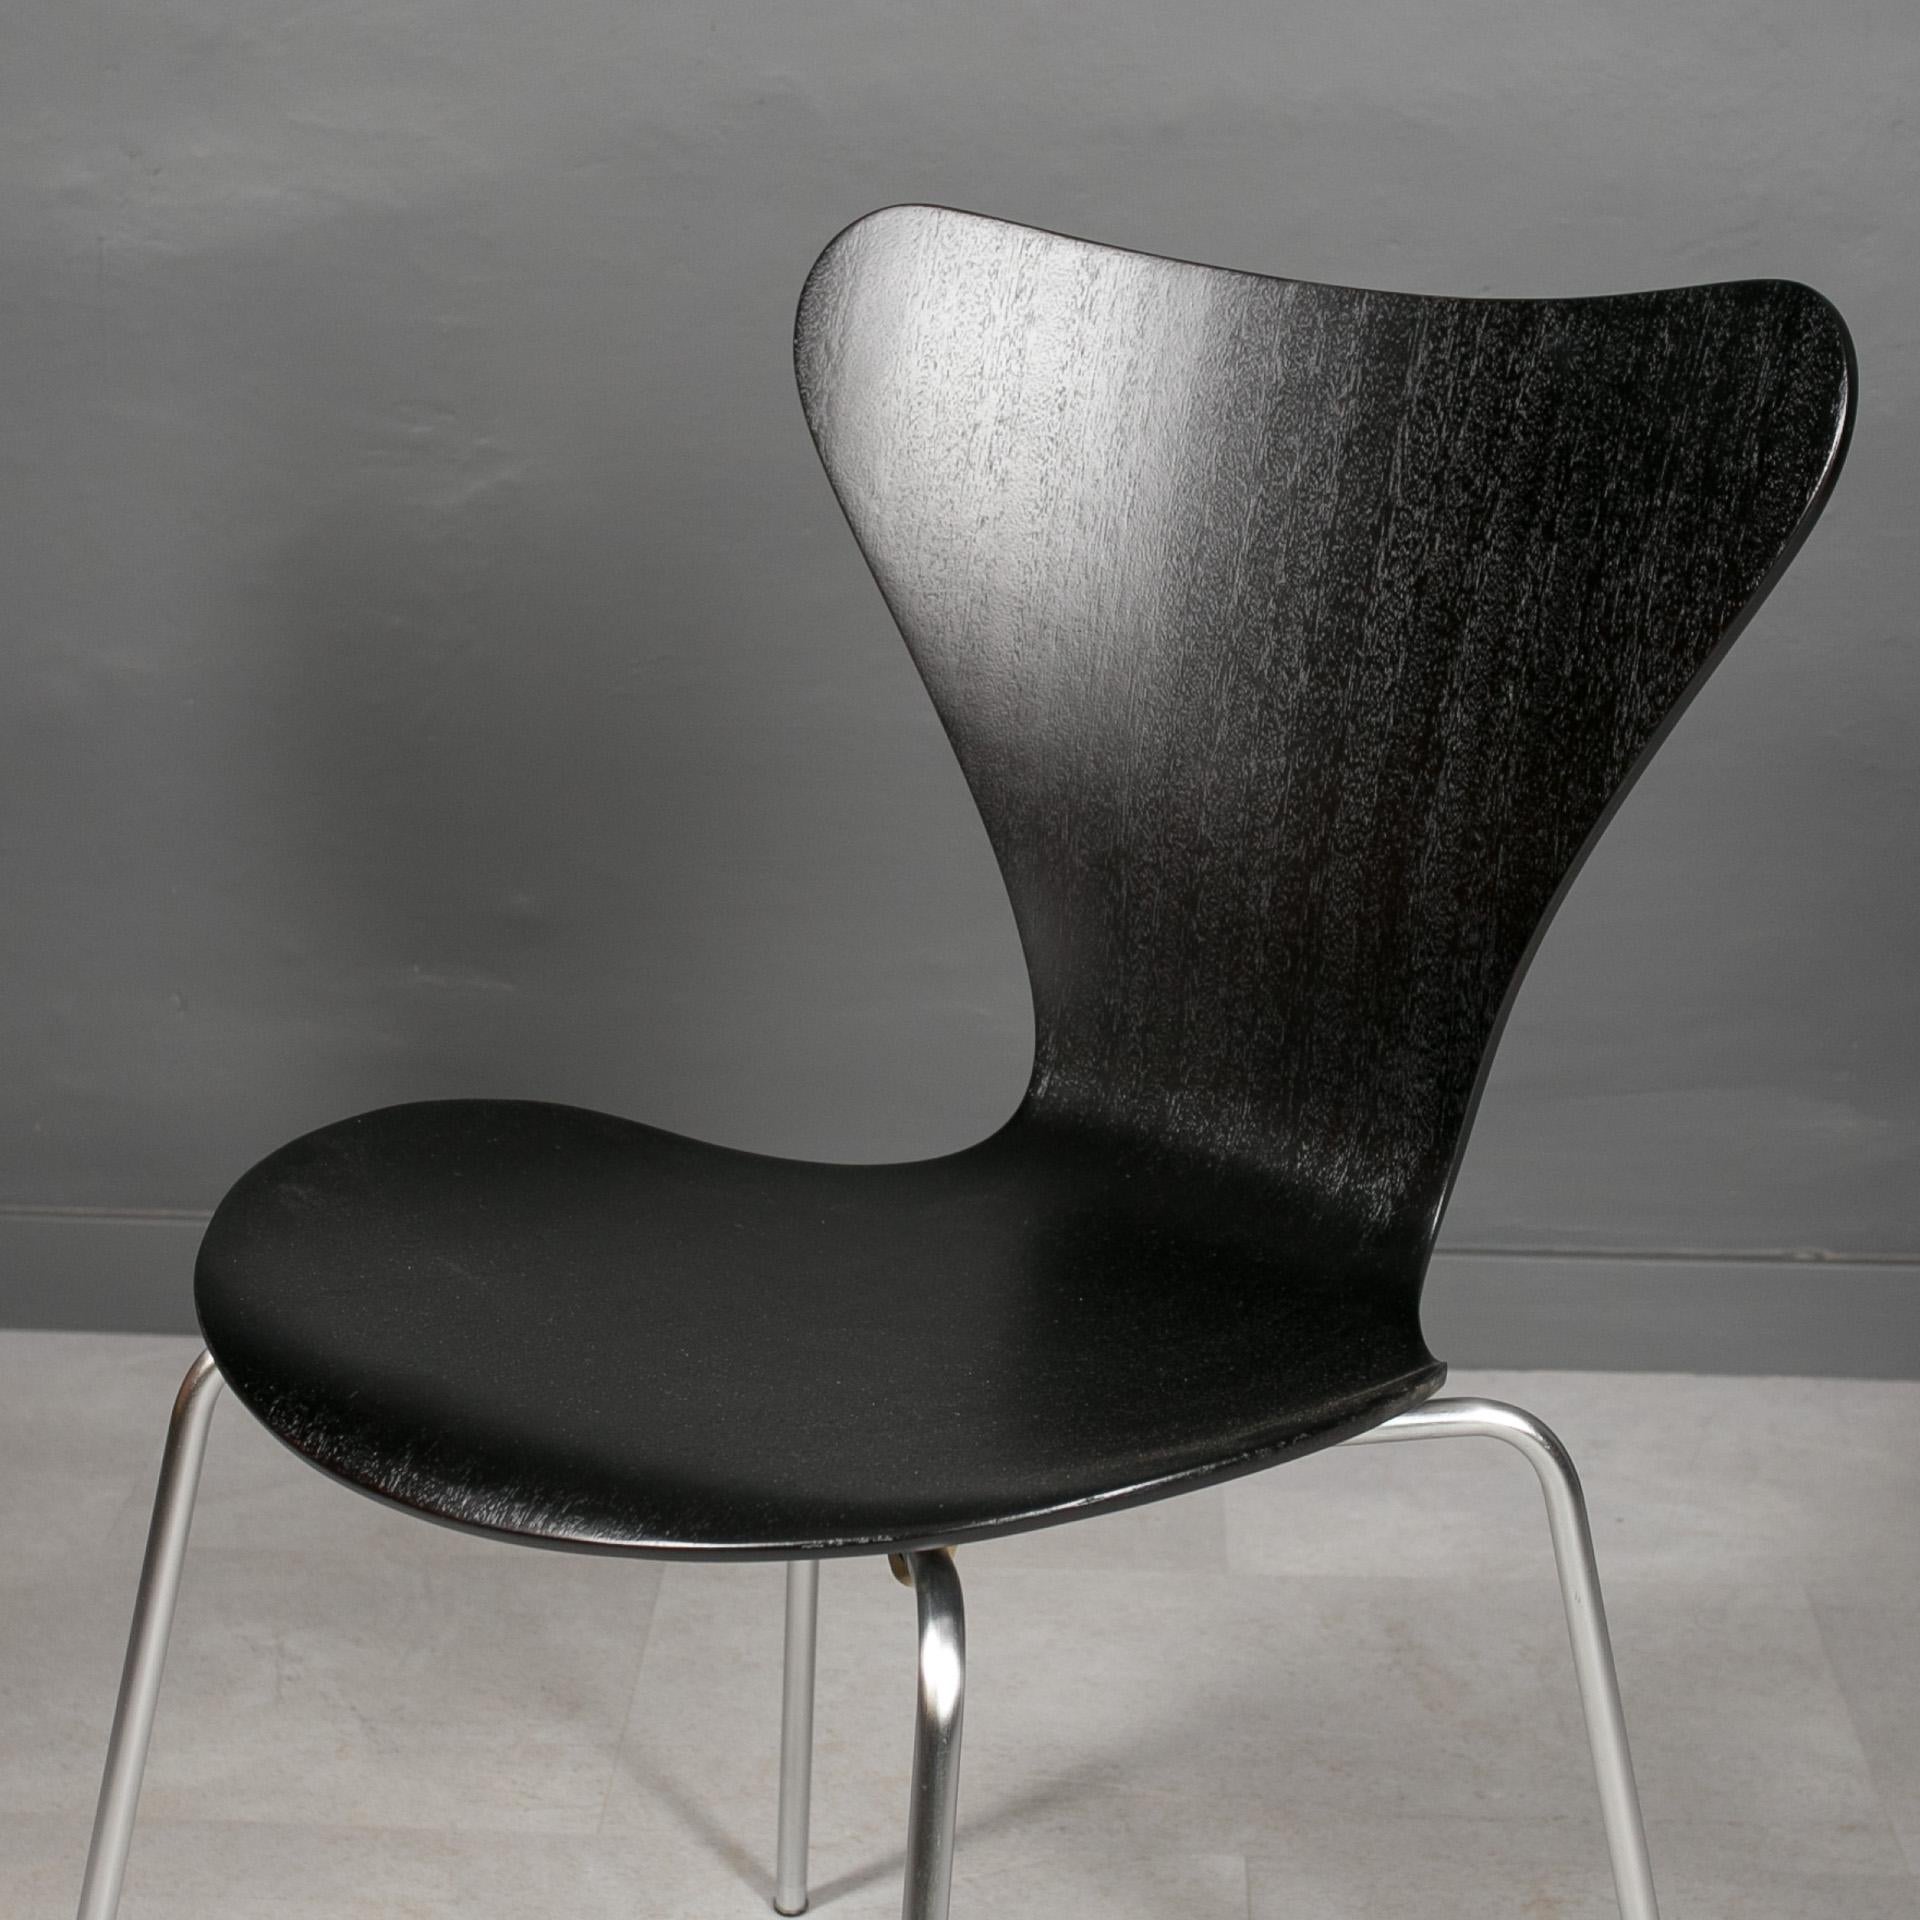 Set of 6 Dining Chairs in Black, Series7 by Arne Jacobsen, Fritz Hansen, 1950s For Sale 9